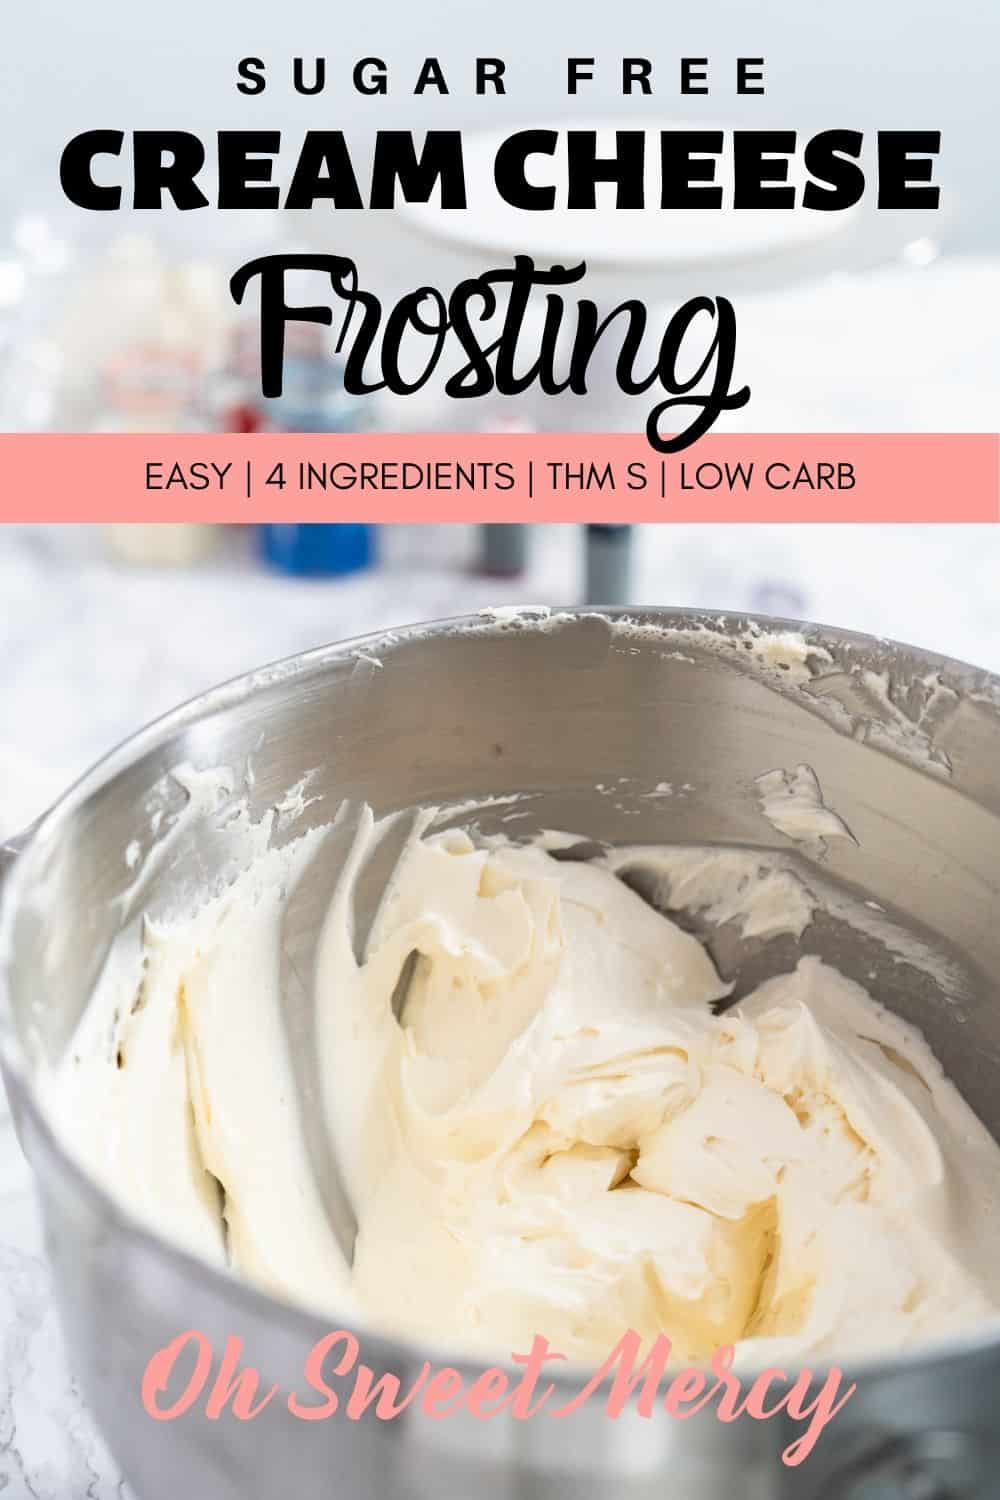 Quick and easy Sugar Free Cream Cheese Frosting takes just 4 ingredients and less than 5 minutes. Perfect for THM, low carb, and keto cakes, cupcakes, muffins, and more. #thm #lowcarb #sugarfree #keto #frosting @ohsweetmercy